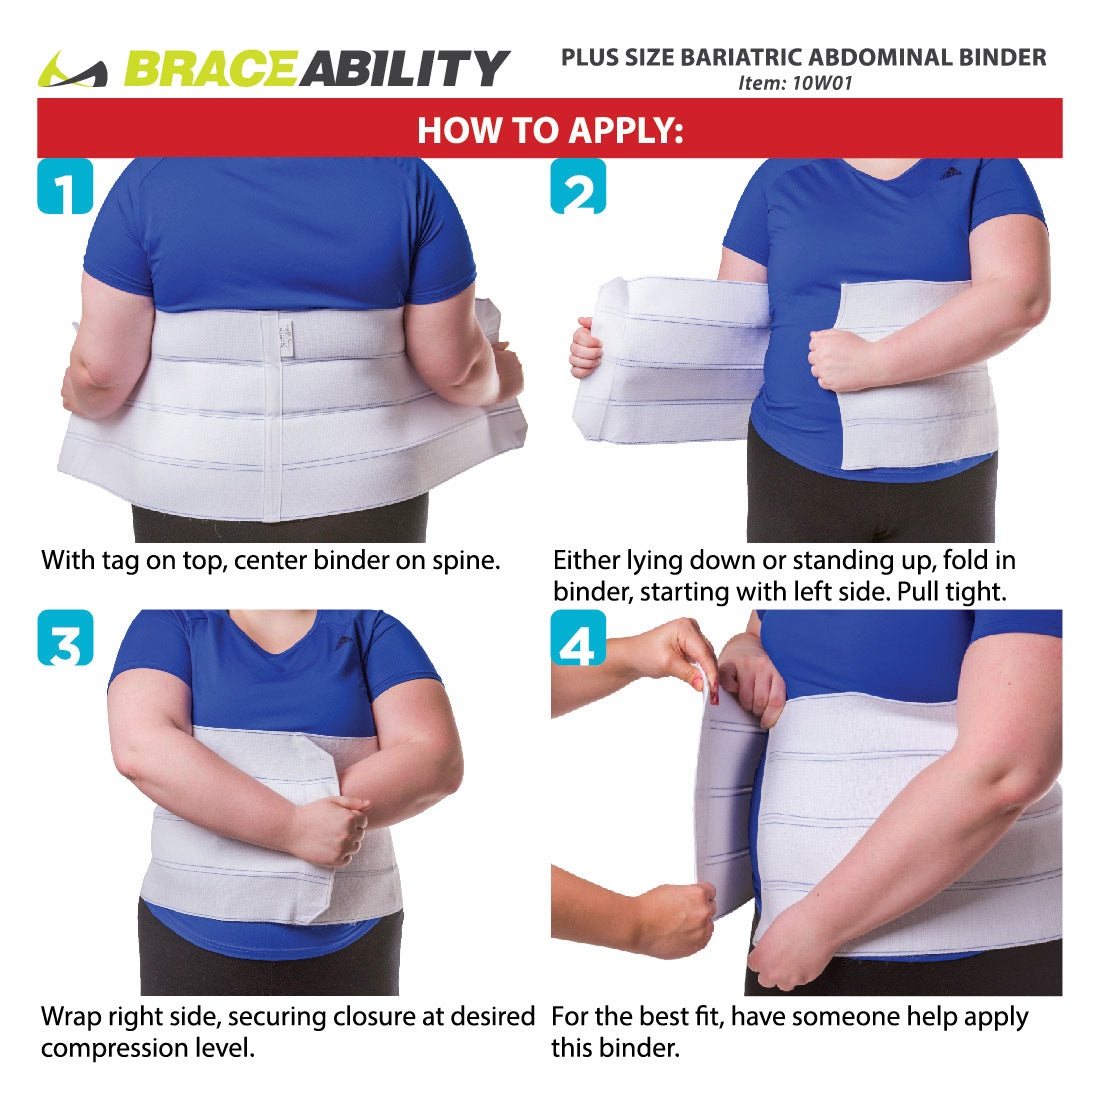 to put on the plus size abdominal binder, position the wrap behind your back, fold in the right side followed by the left